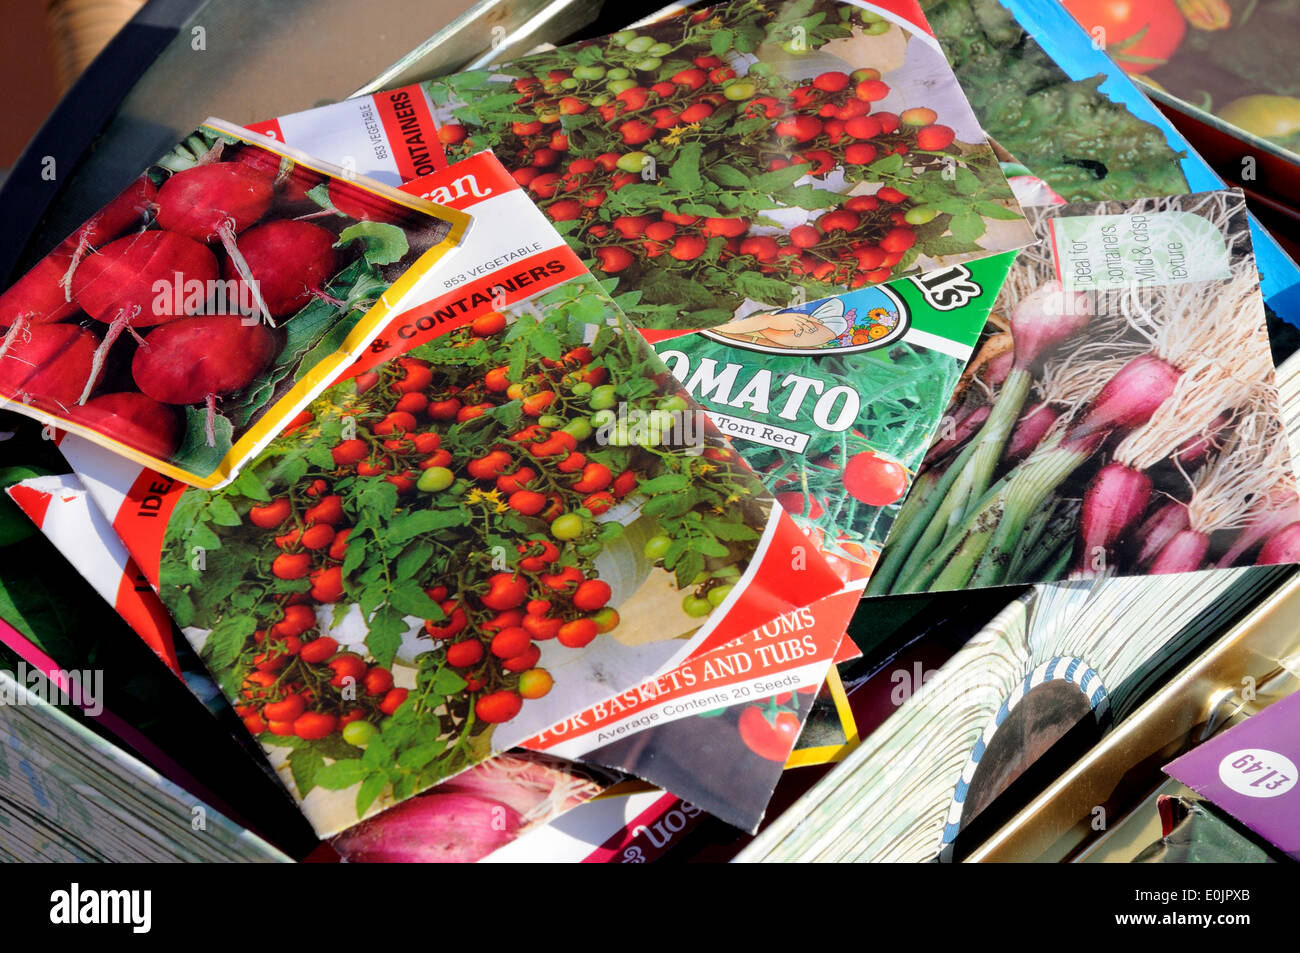 Selection of vegetable seed packets, England, UK, Western Europe. Stock Photo